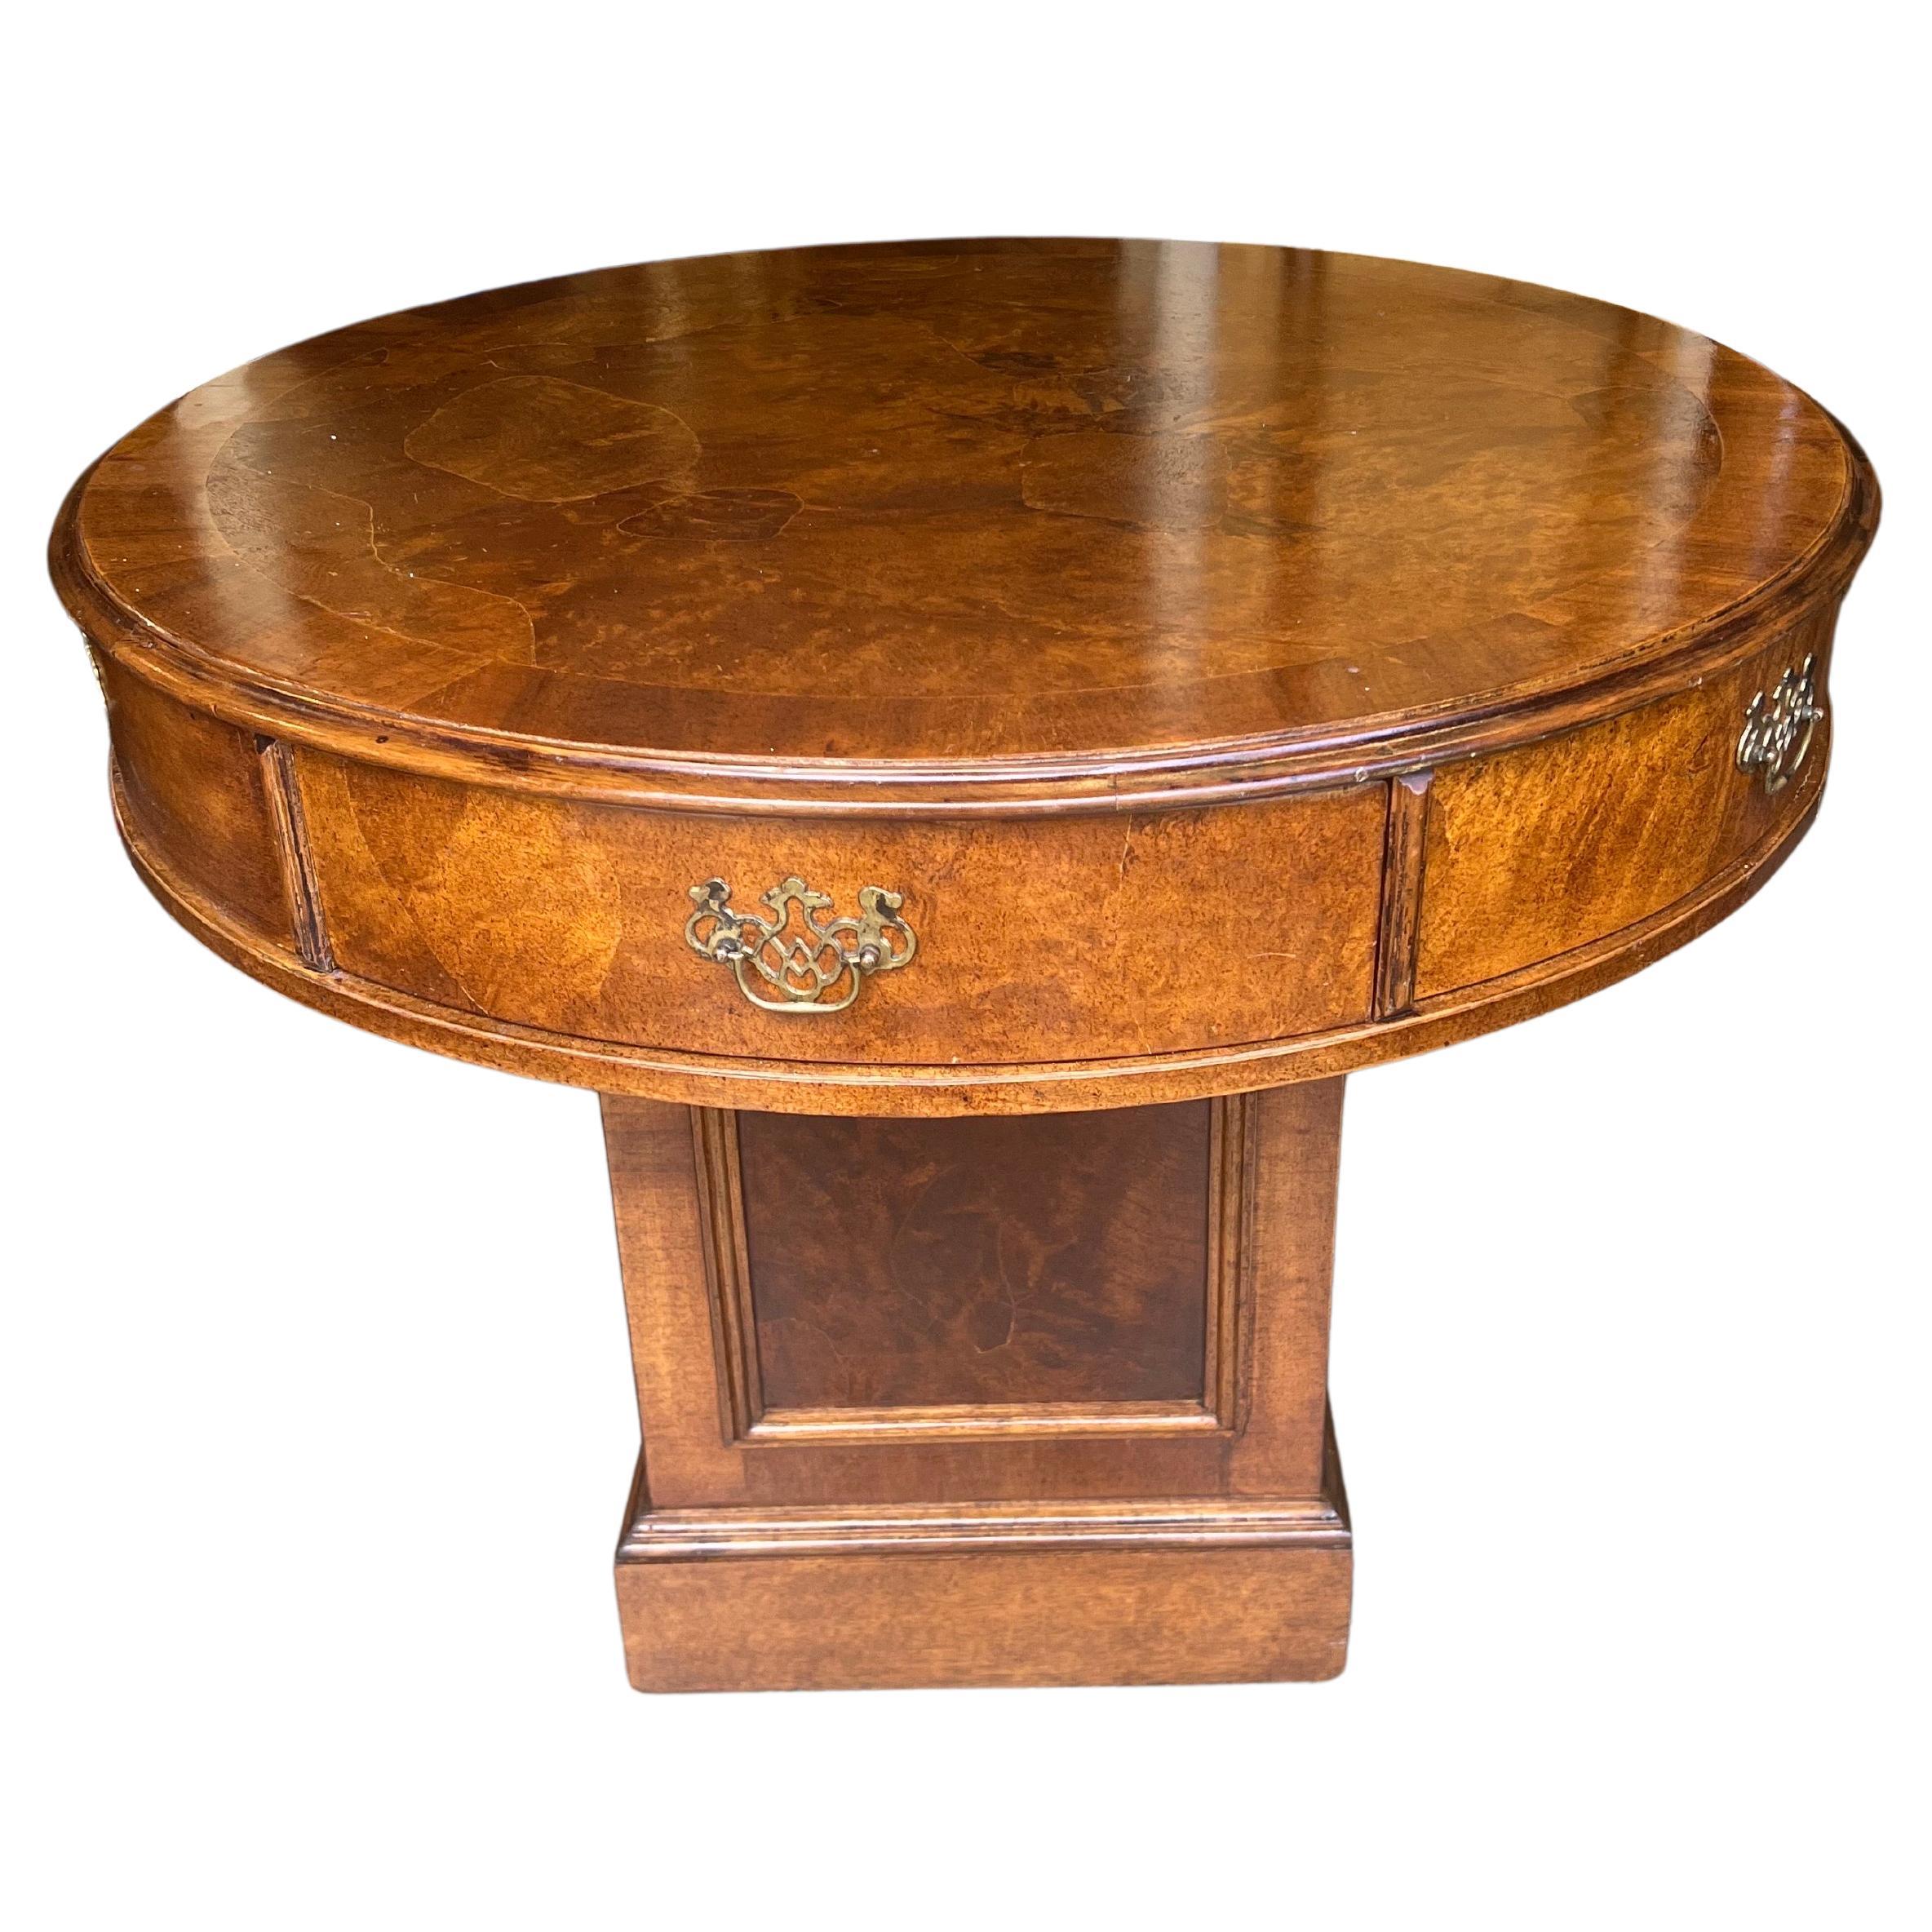 Early 20th Century Burled English Walnut Pedestal Center or Occasional Table For Sale